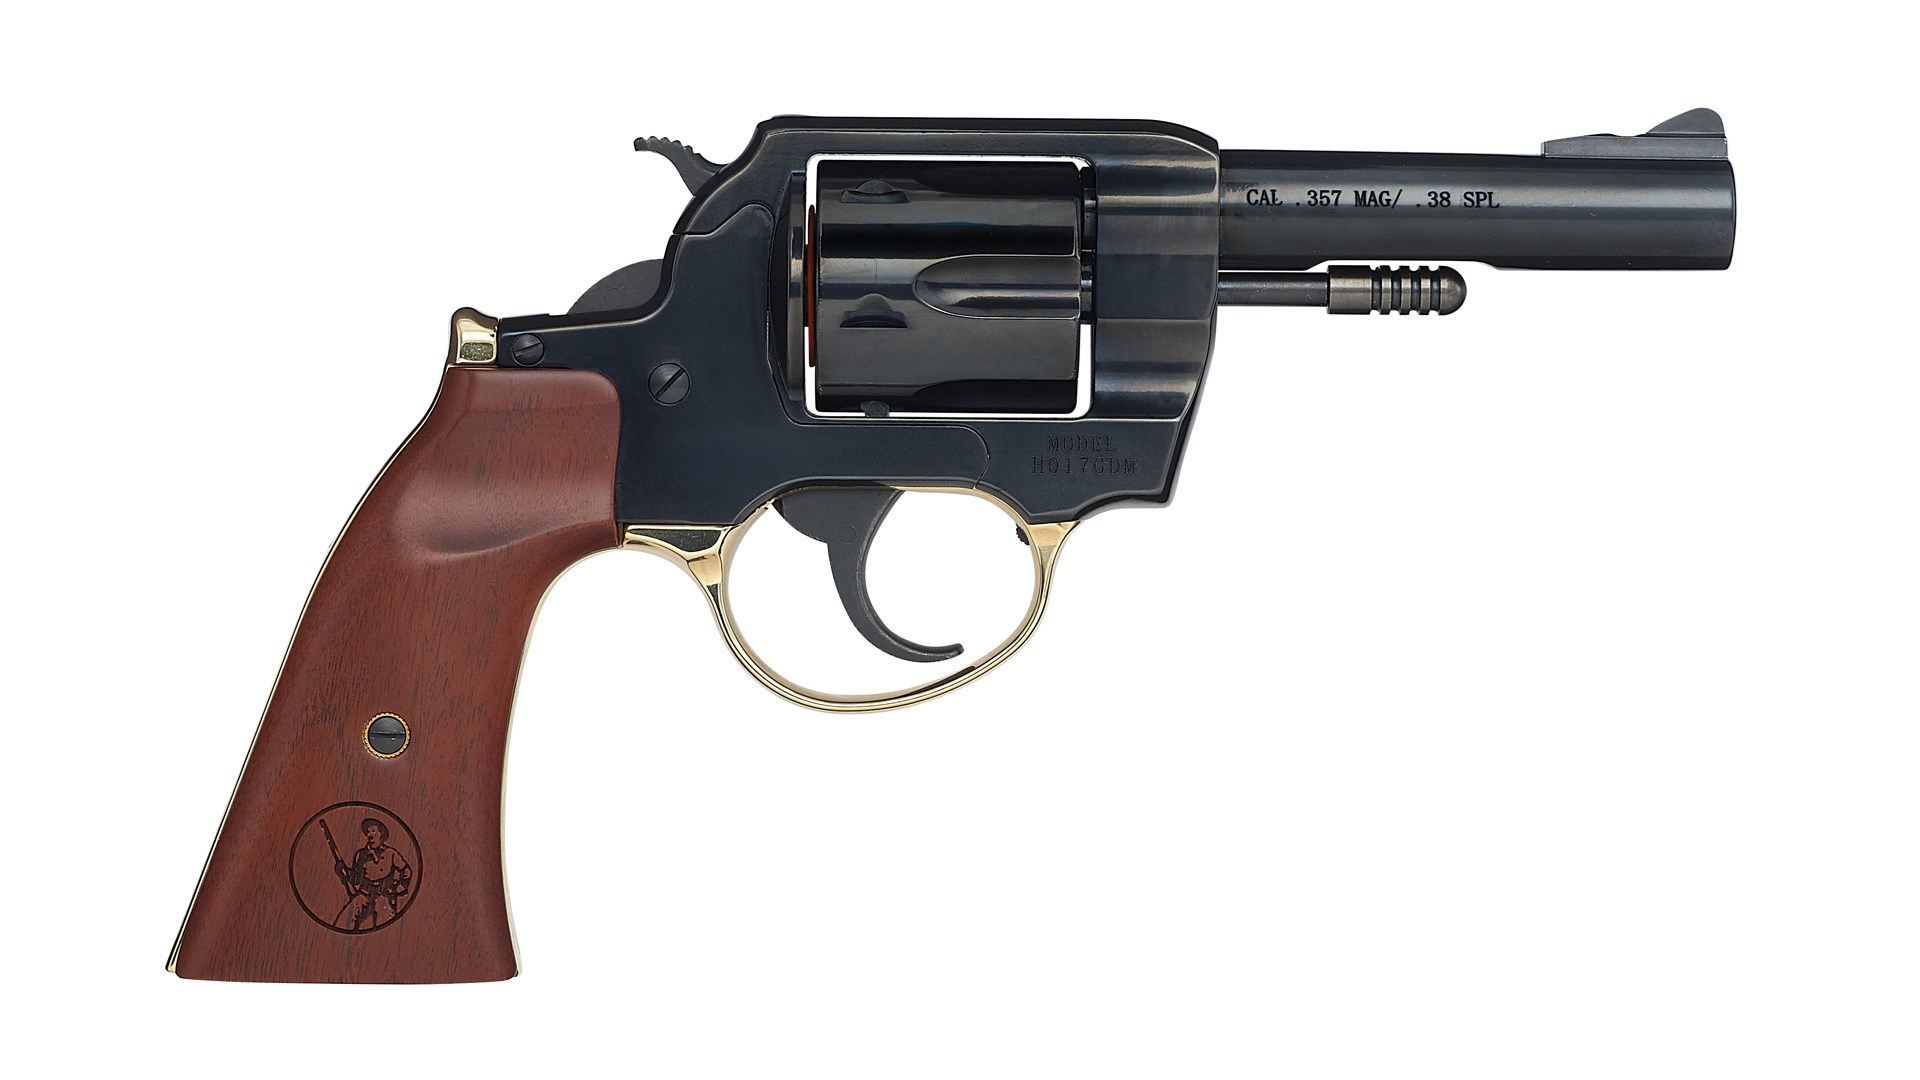 Right side of the Henry Big boy revolver shown with the square-butt design.